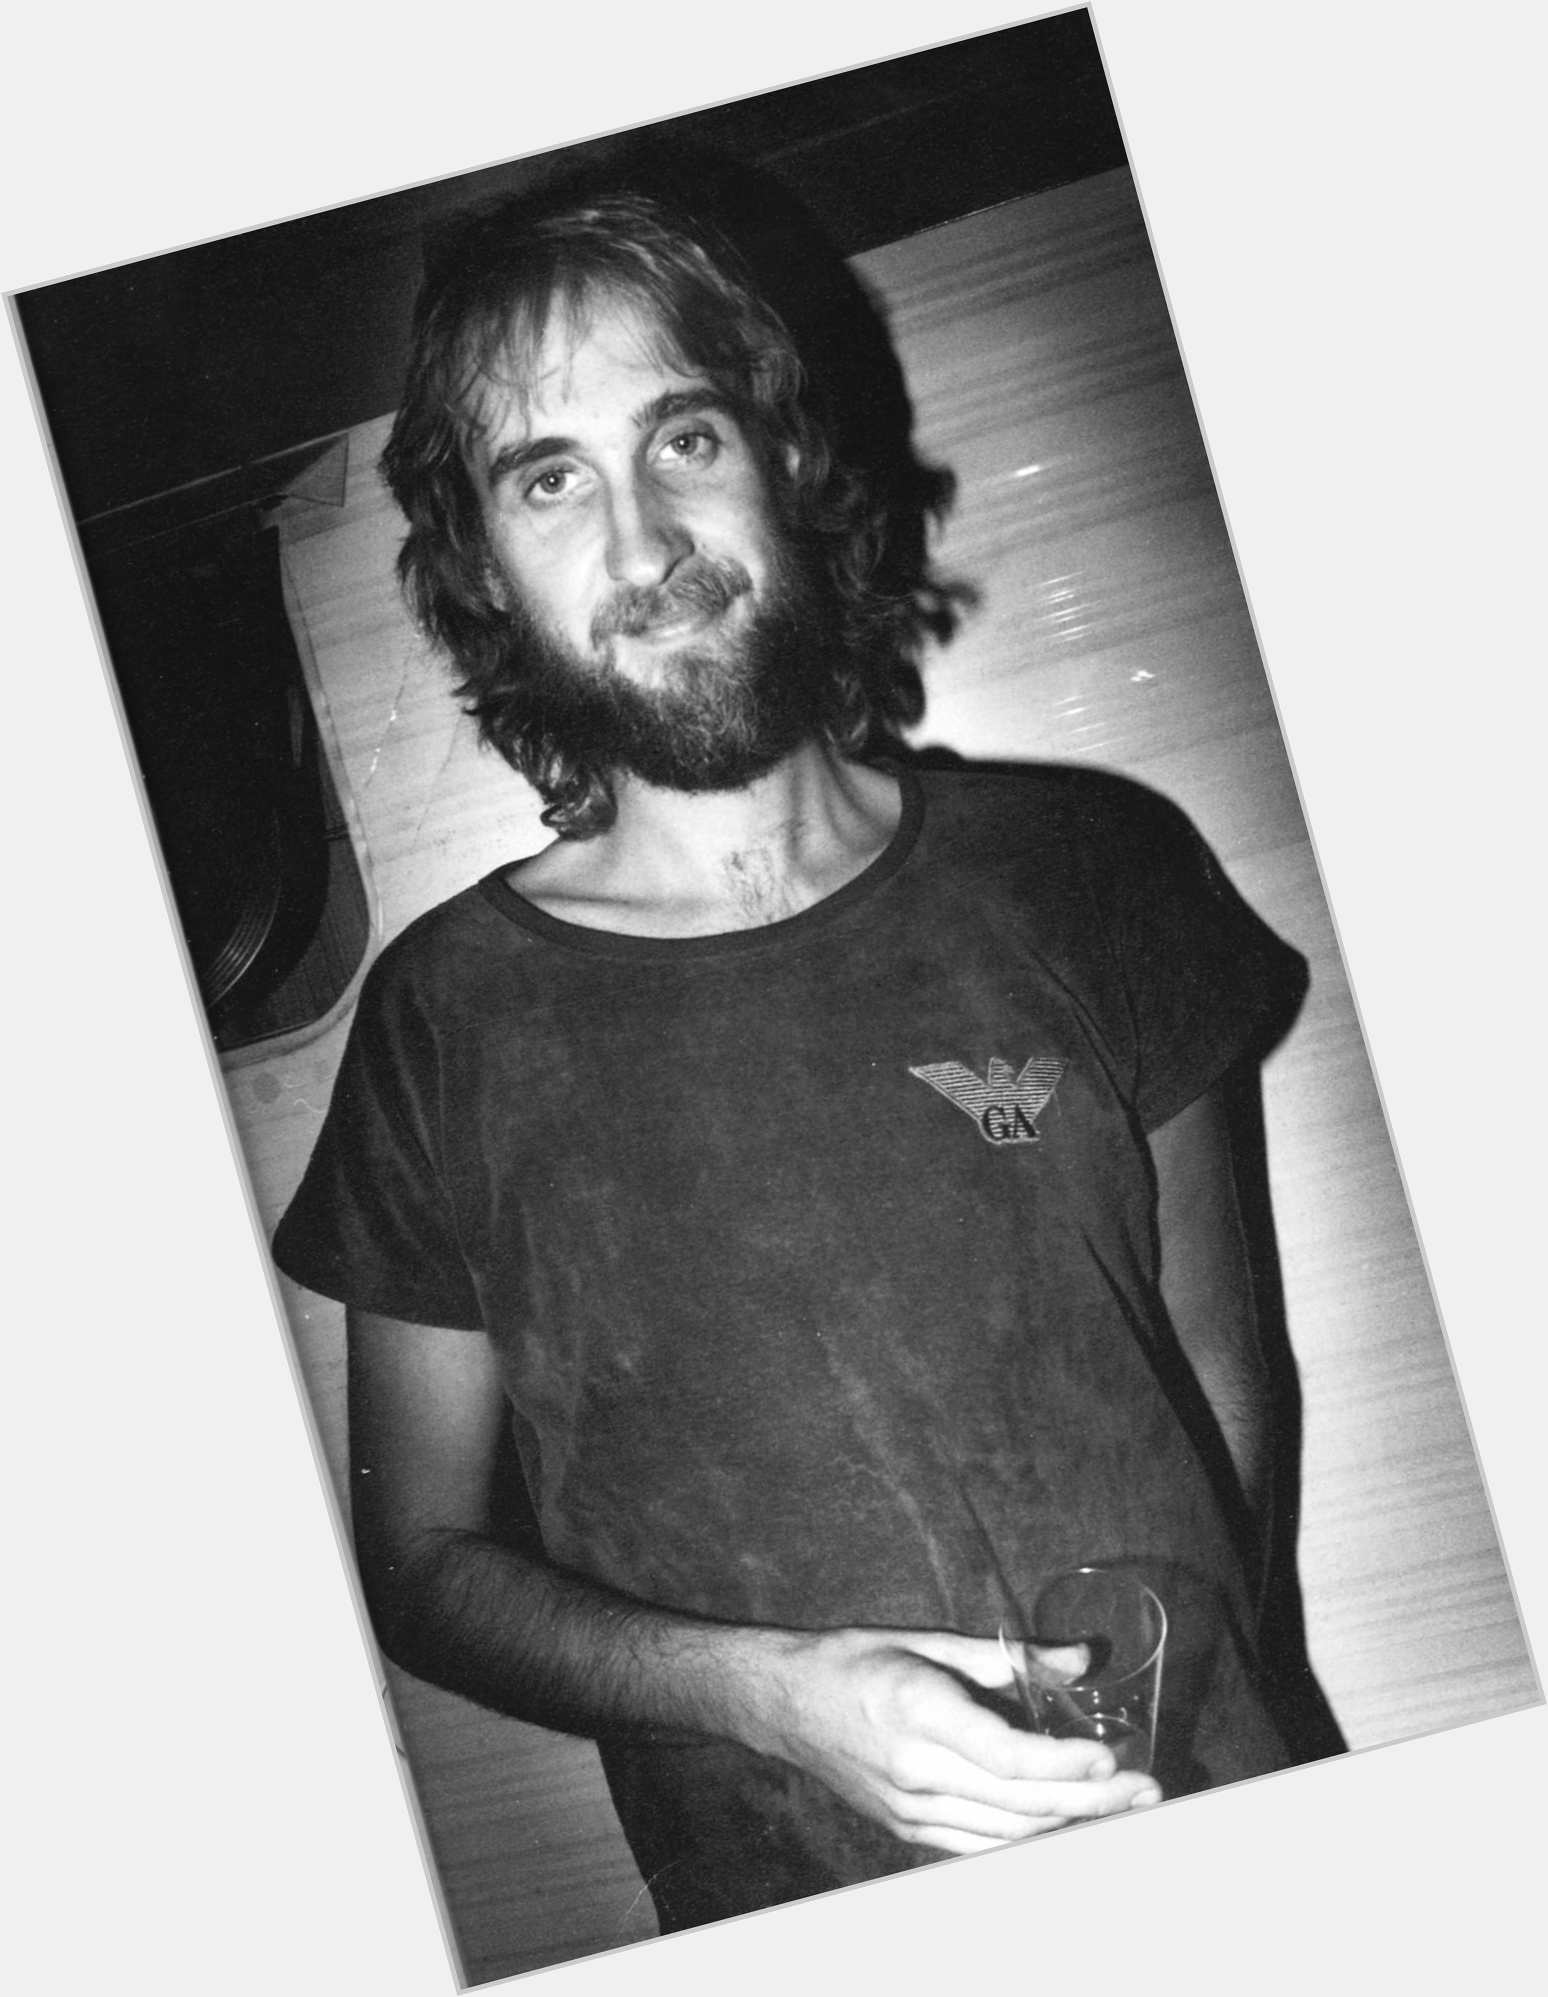 Mike Rutherford where who 3